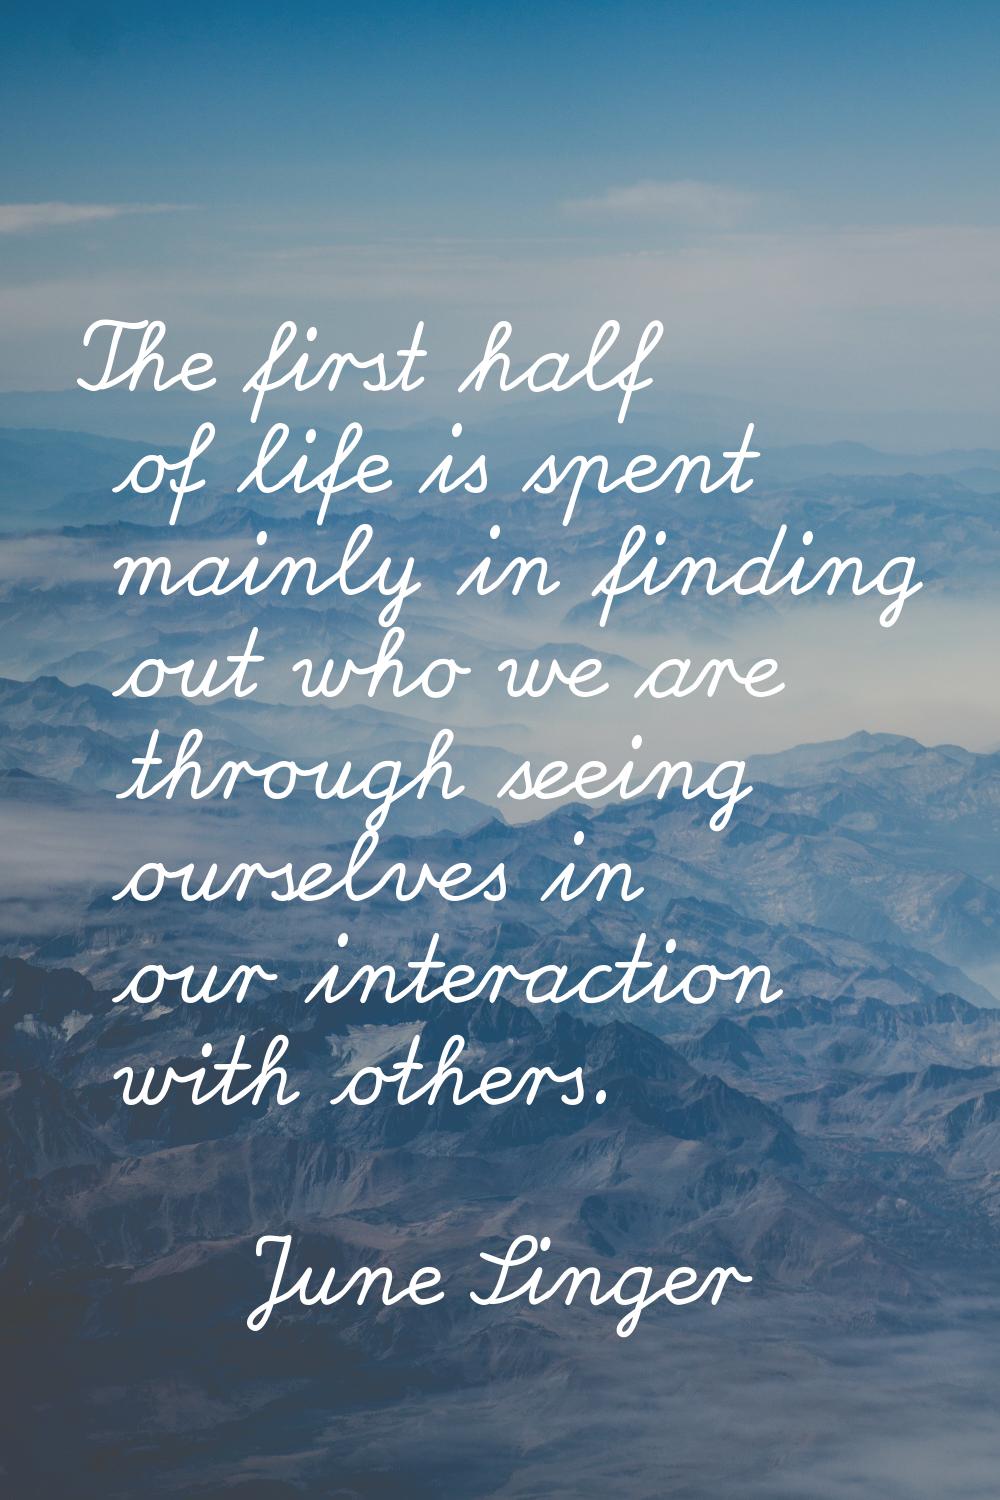 The first half of life is spent mainly in finding out who we are through seeing ourselves in our in